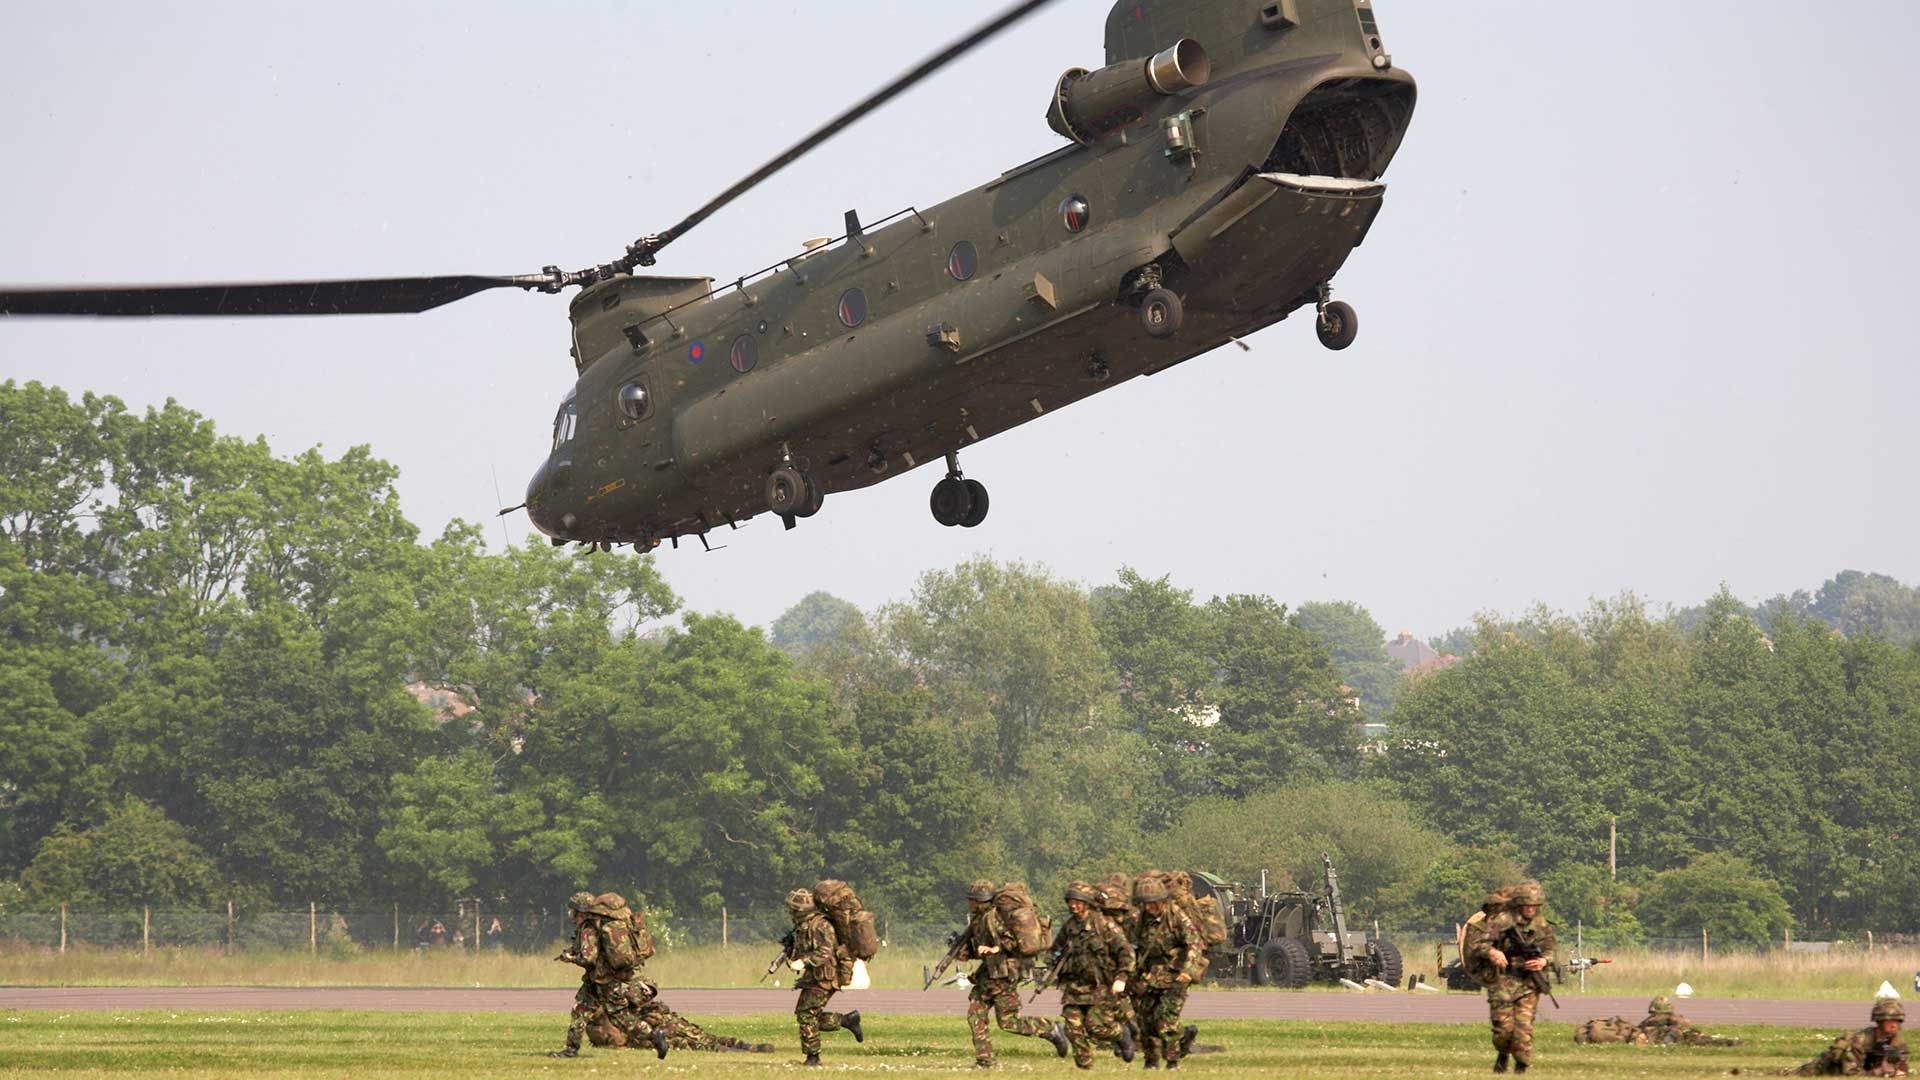 Military chinook flying with soldiers on the ground ready to disperse 